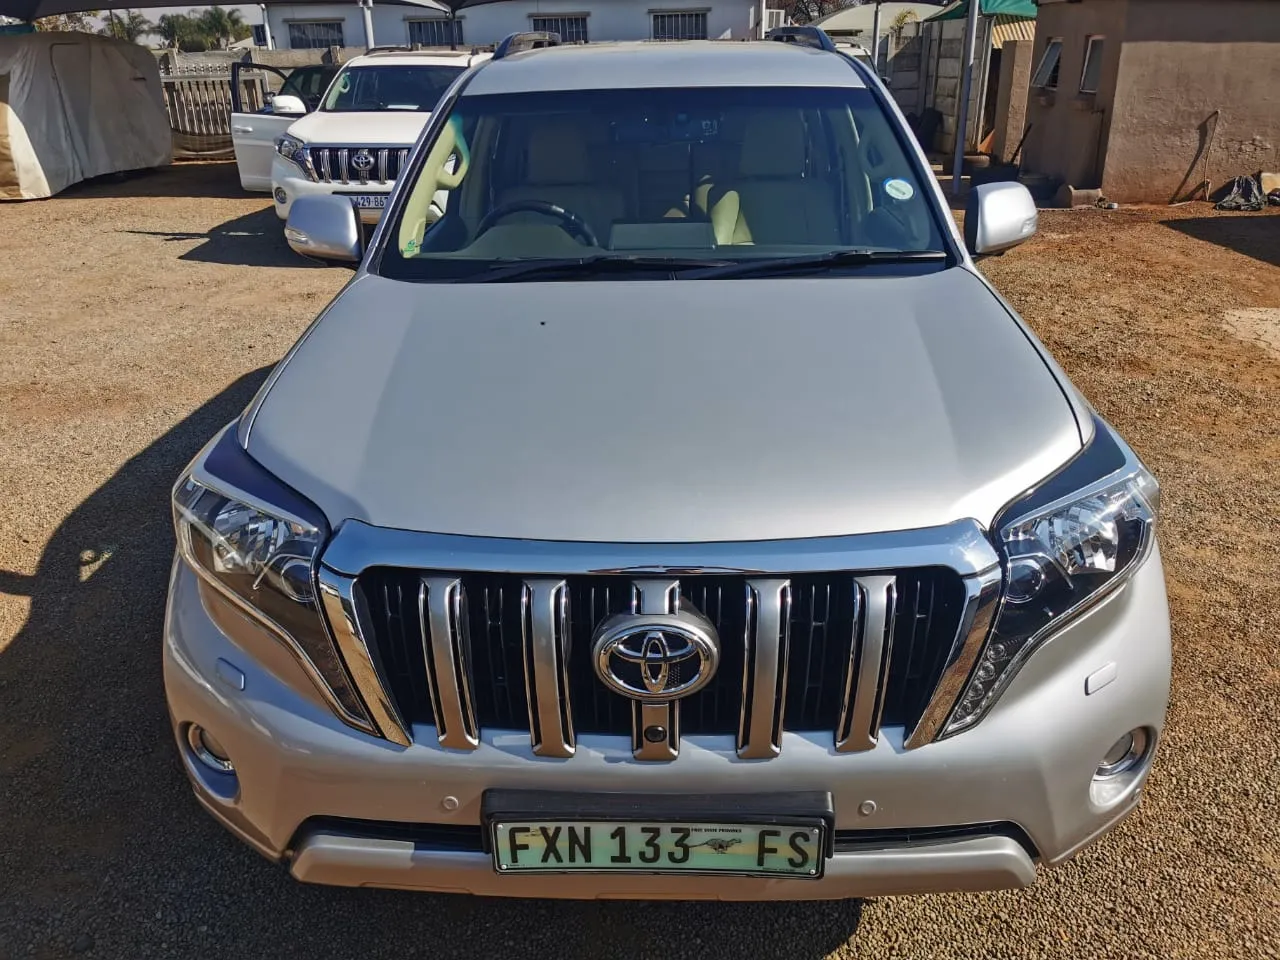 Toyota PRADO VXL for sale in Kenya two tanks 3000cc Sunroof Quick SALE TRADE IN OK EXCLUSIVE!